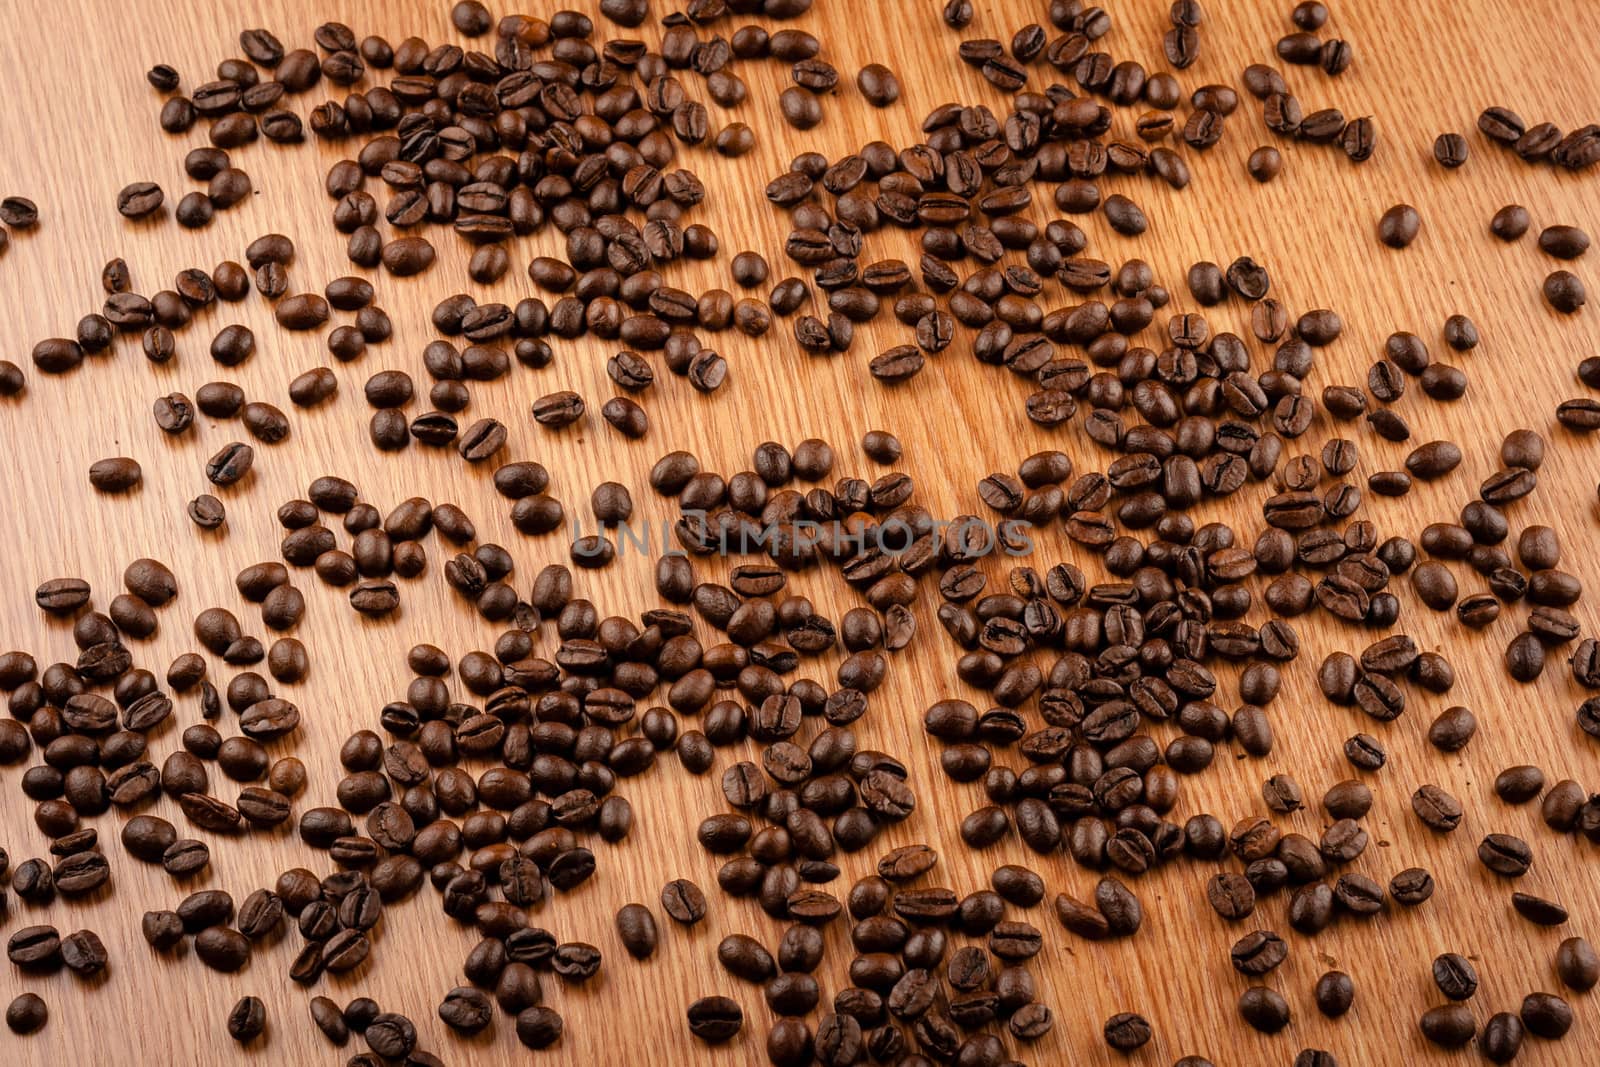 Scattered coffee beans on wooden table